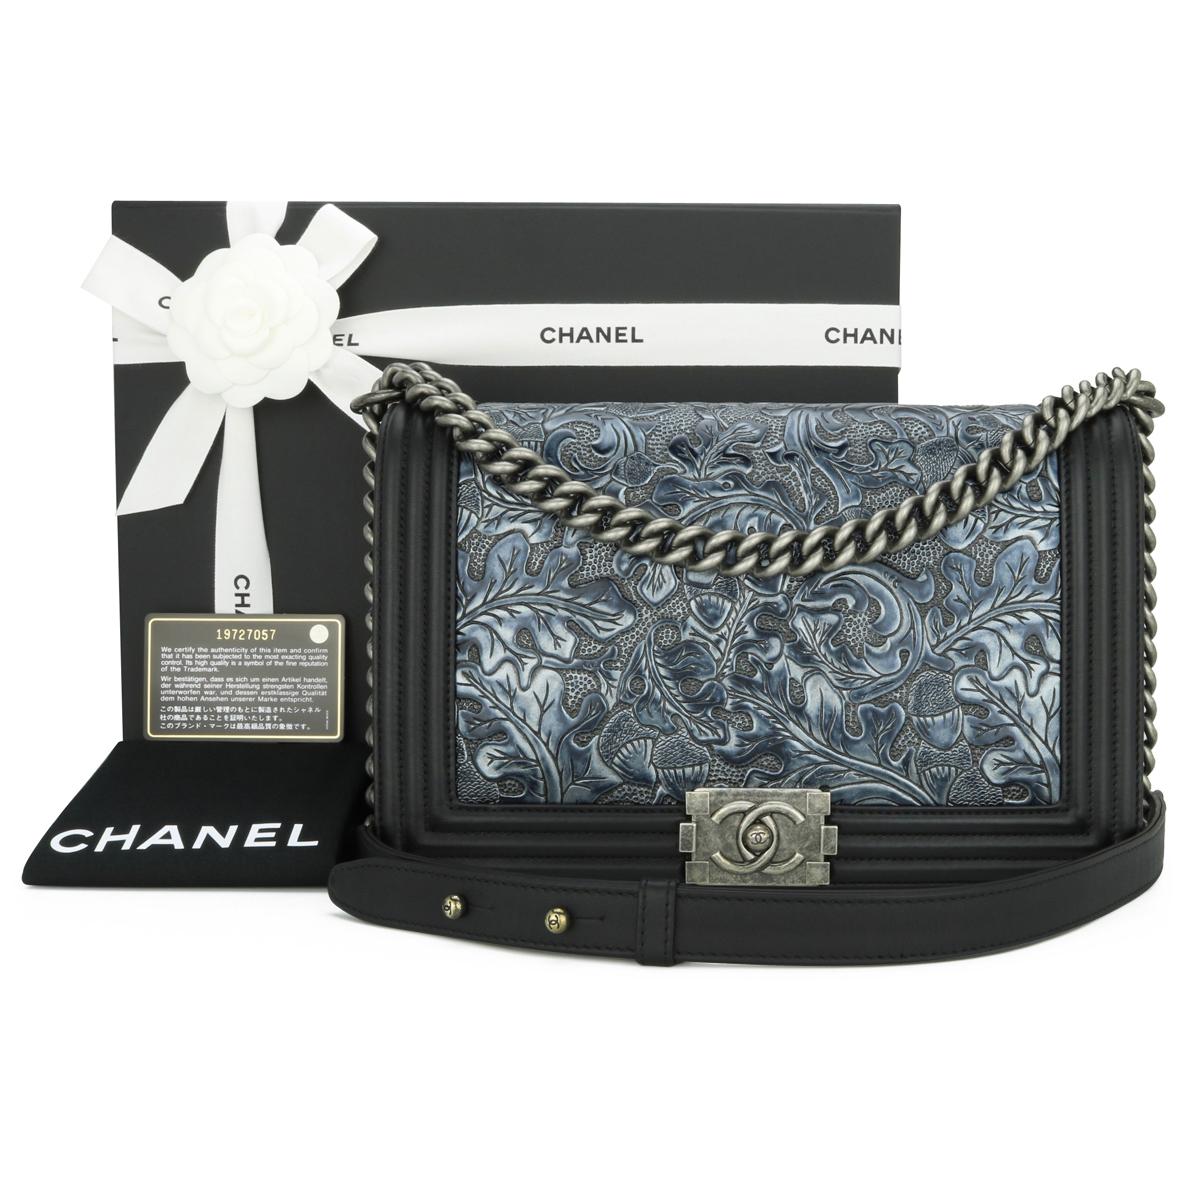 CHANEL New Medium Cordoba Paris Dallas Boy Bag in Charcoal Black Embossed Calfskin with Ruthenium Hardware 2014 – 14A Limited Edition.

This stunning bag is still in excellent condition, the bag still holds its original shape, and the hardware is